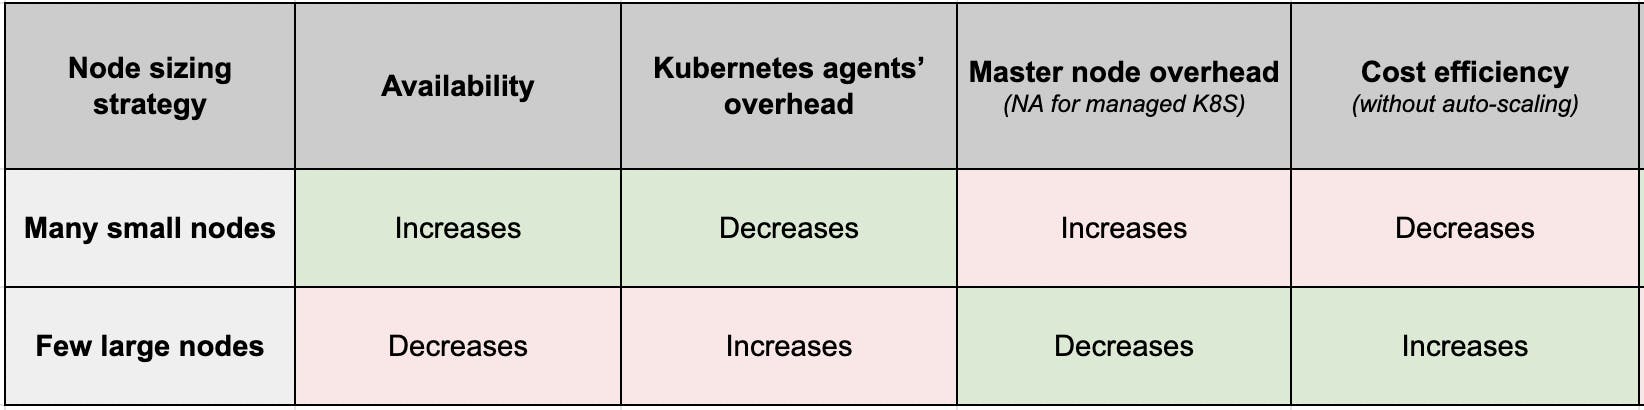 Node sizing strategy and cost efficiency